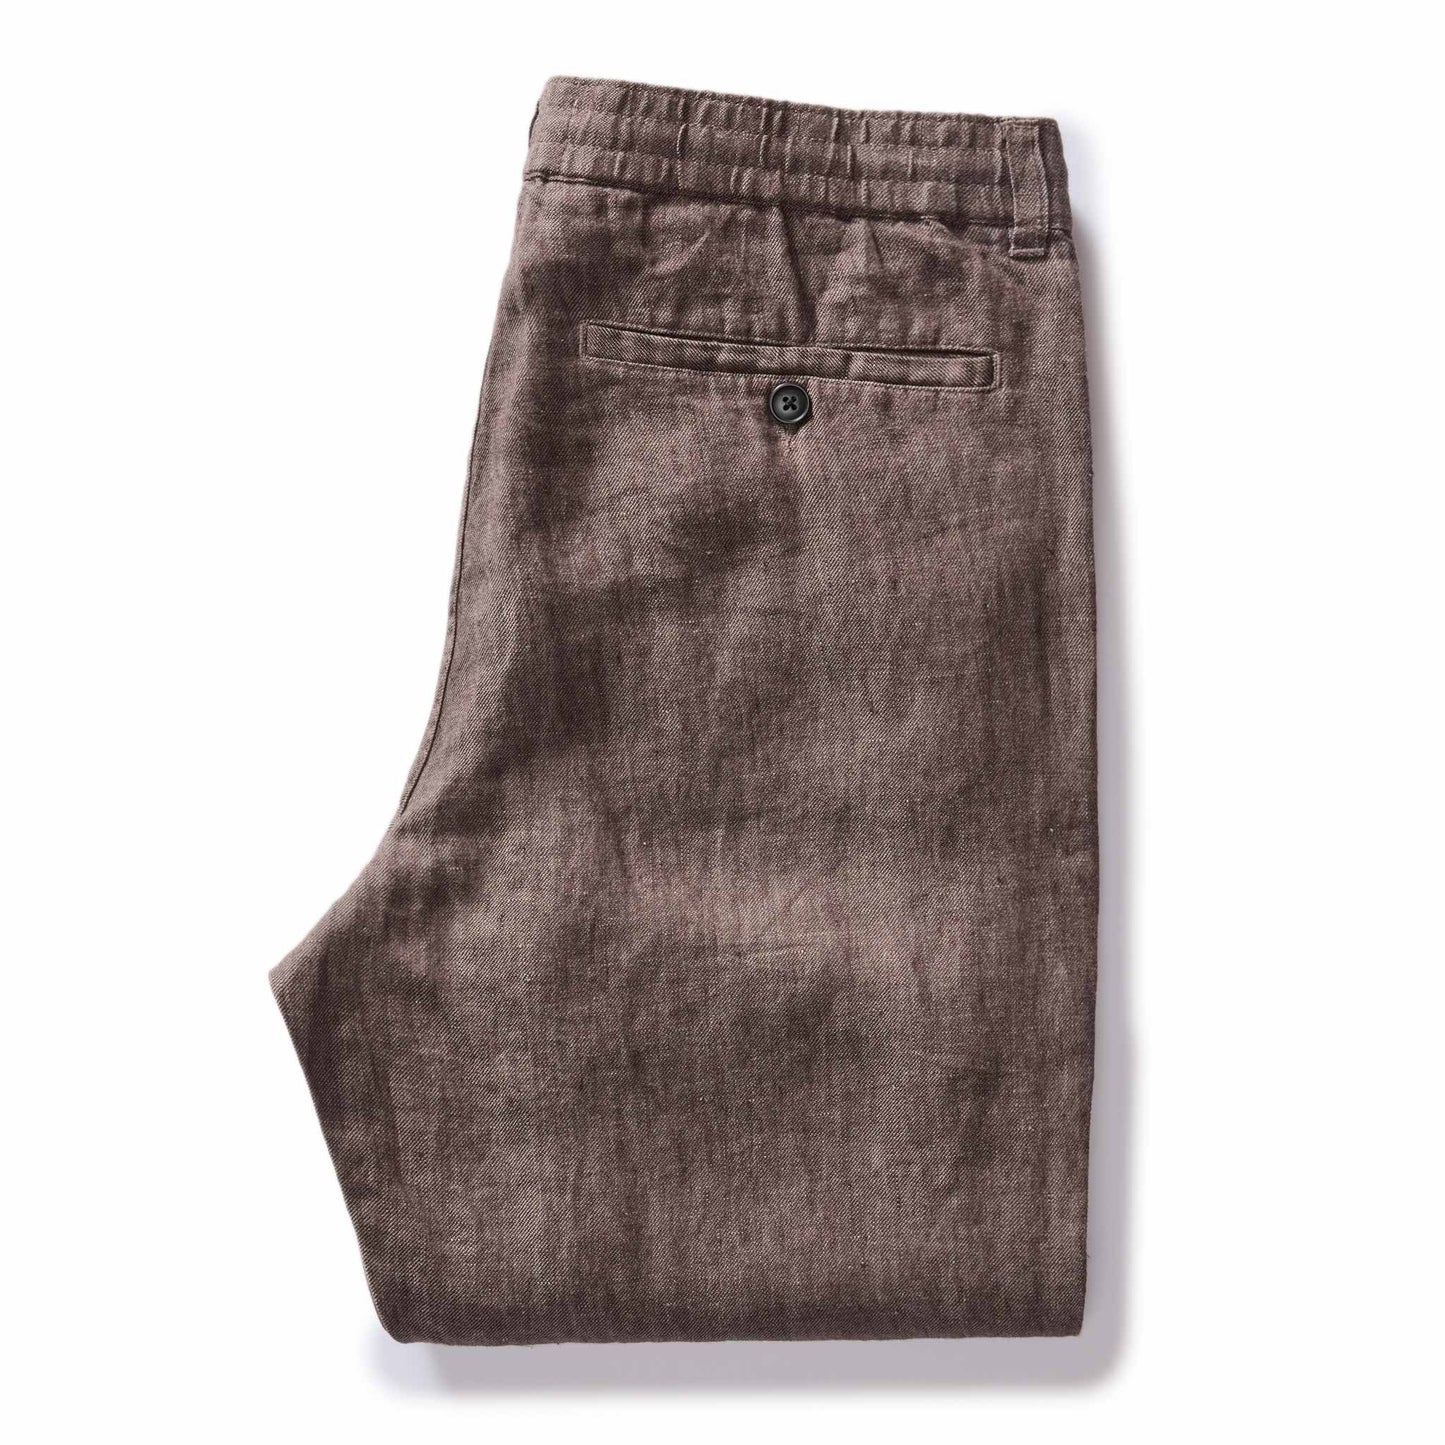 The Easy Pant in Cocoa Linen